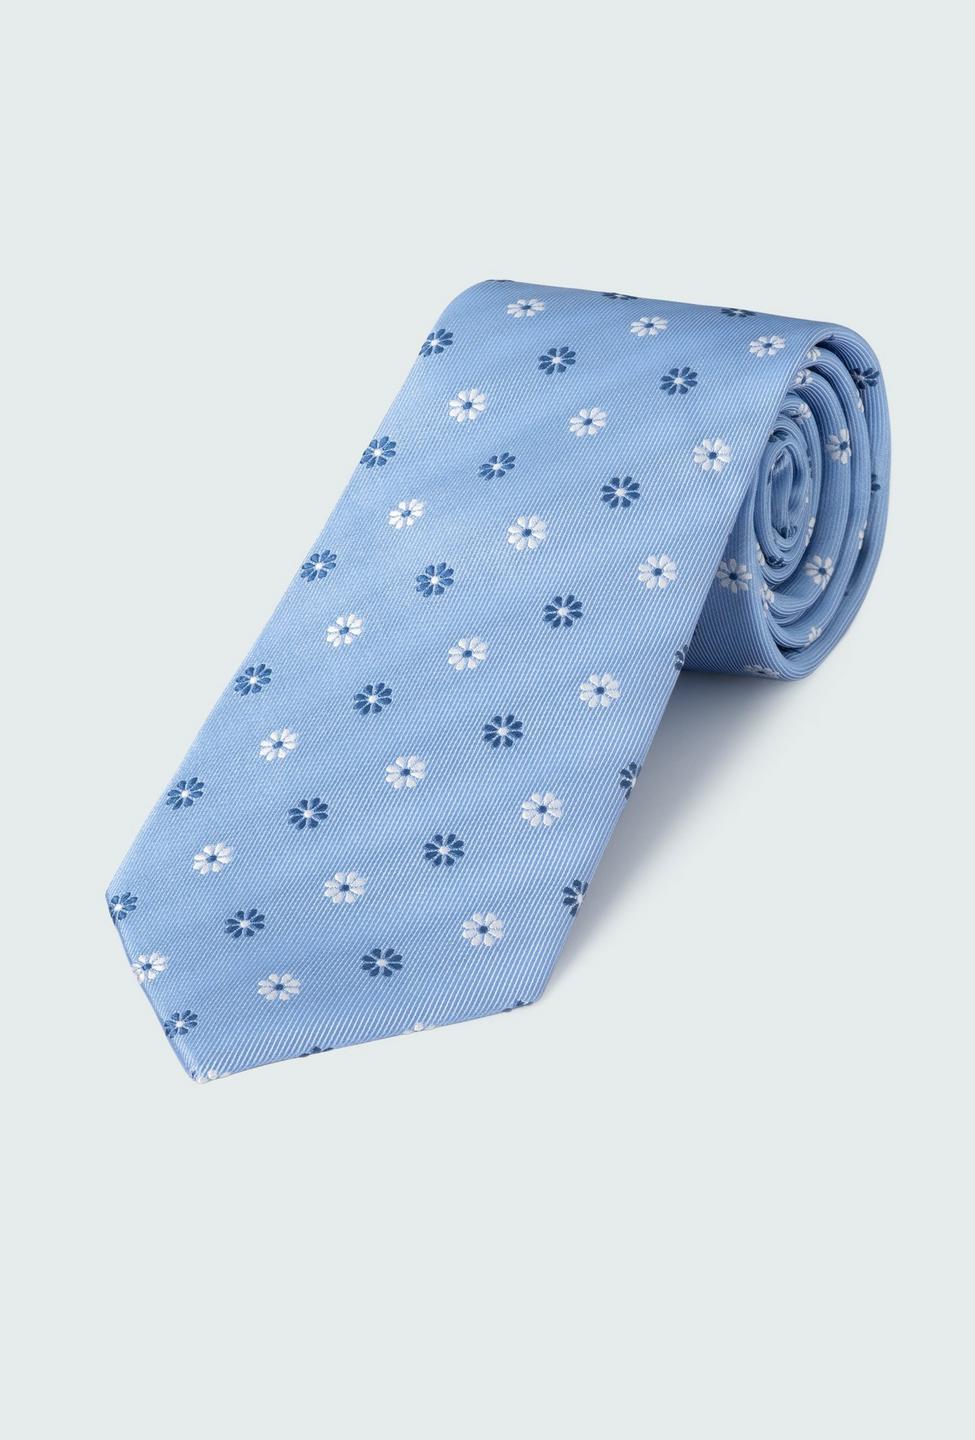 Blue tie - Pattern Design from Indochino Collection